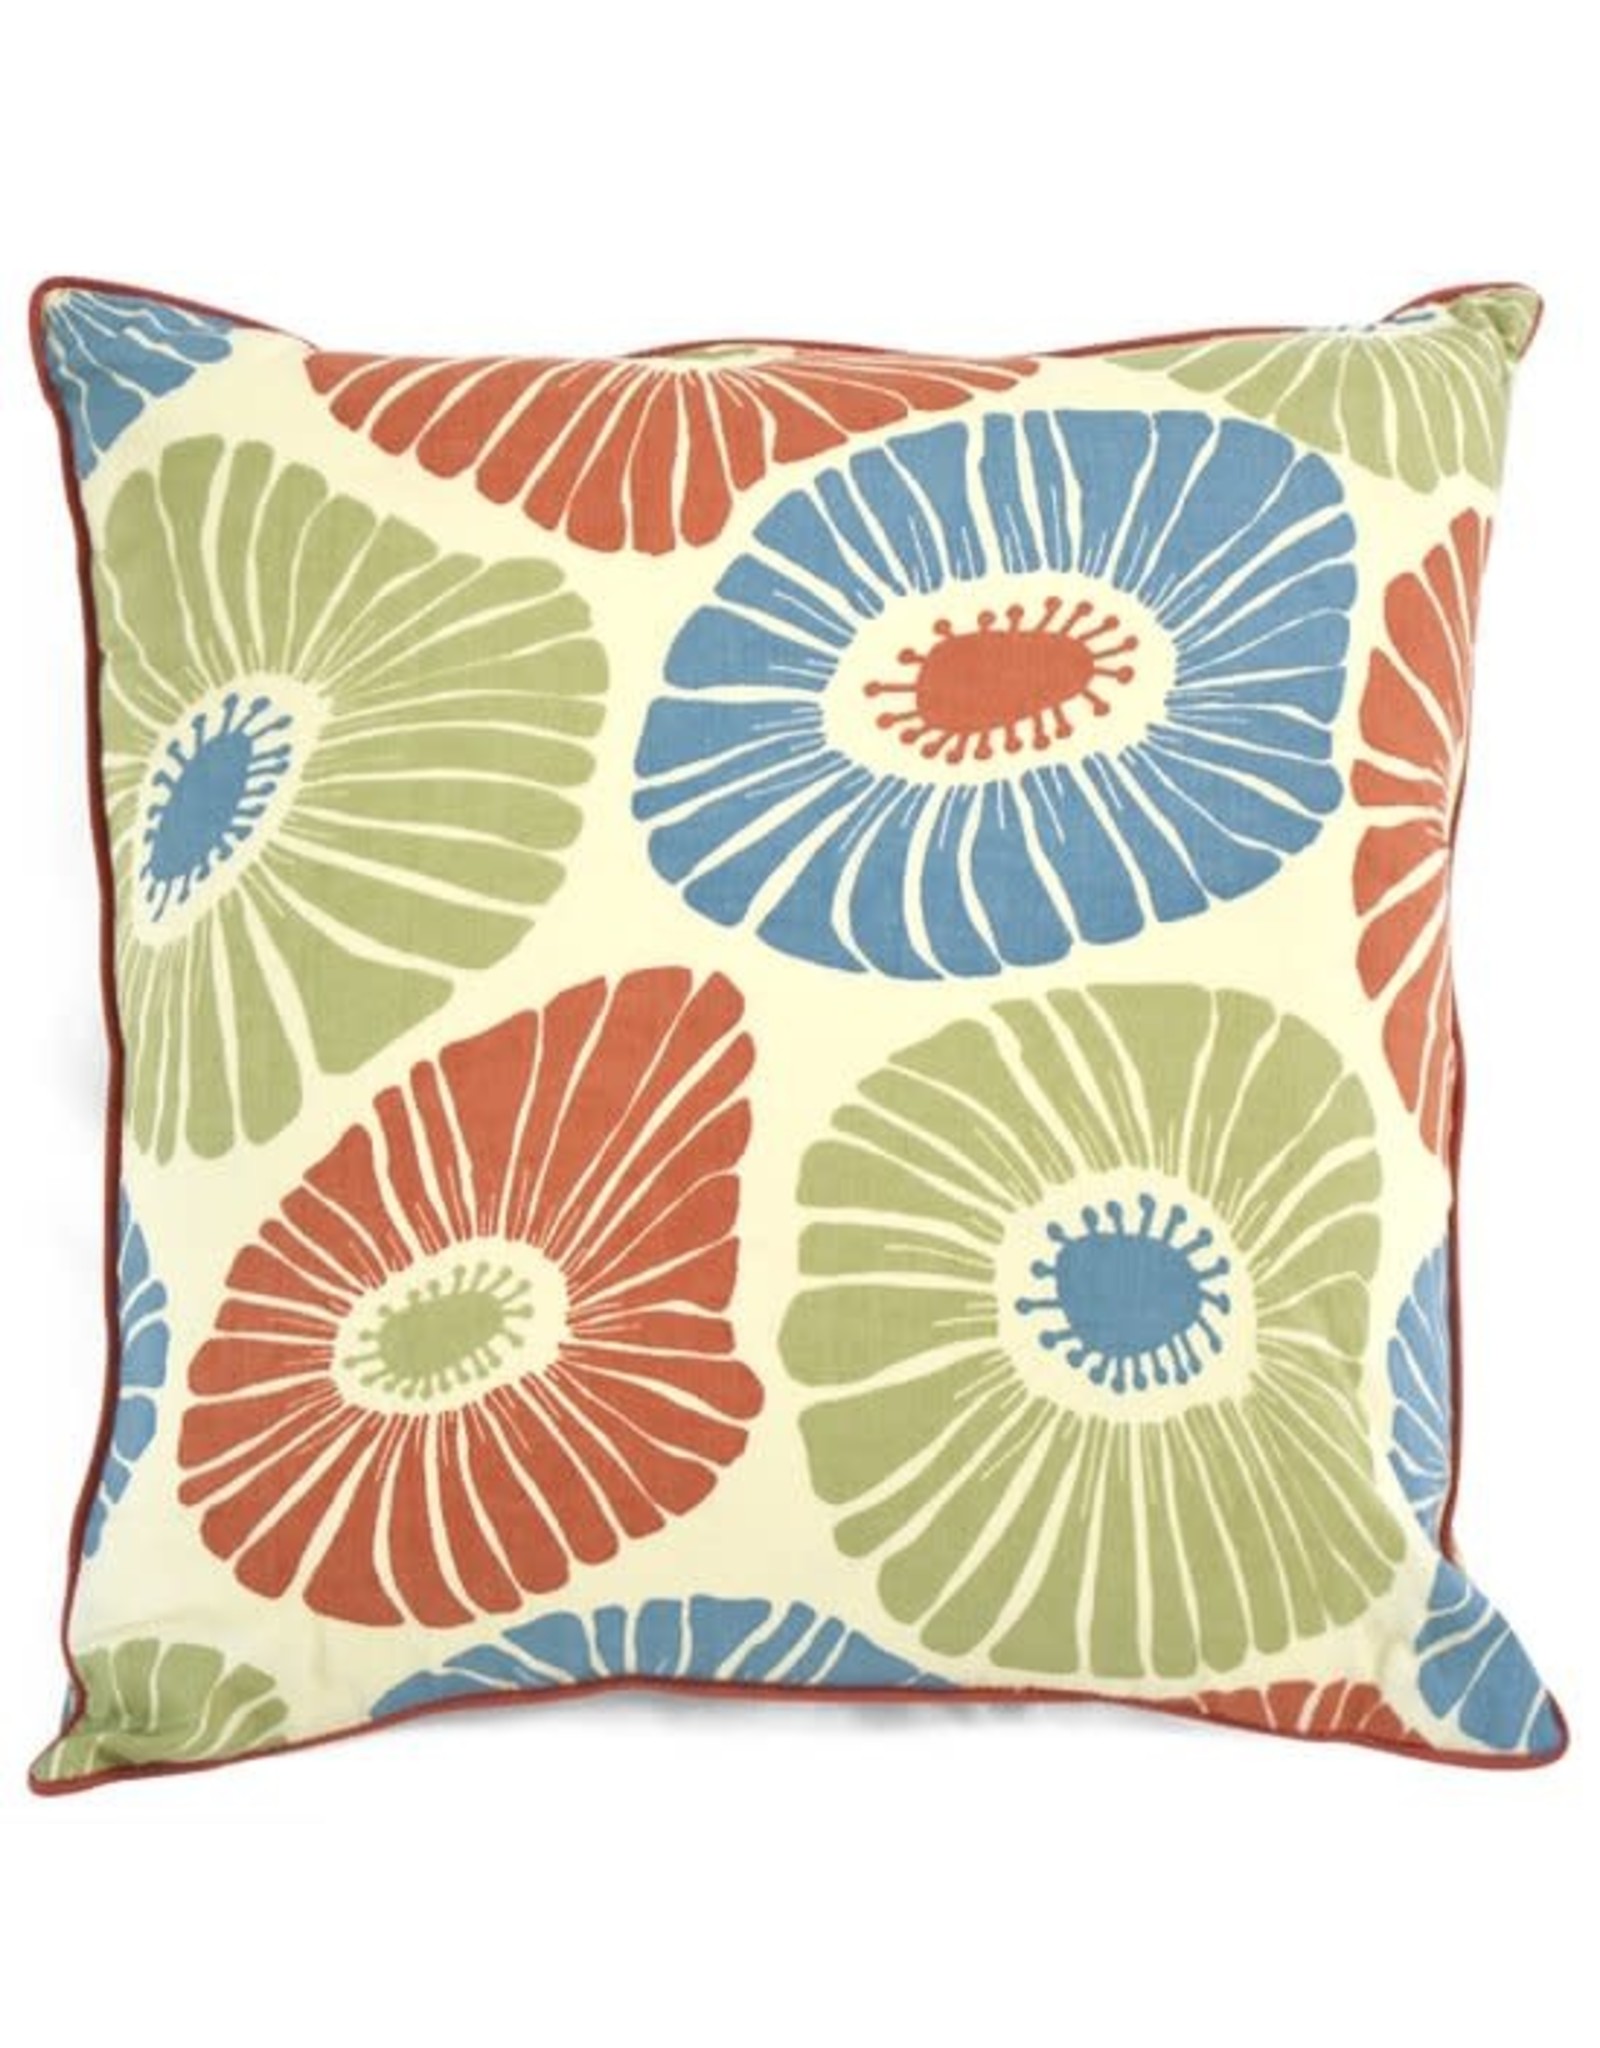 Trade roots Bright Cotton Pillows, 18 x 18